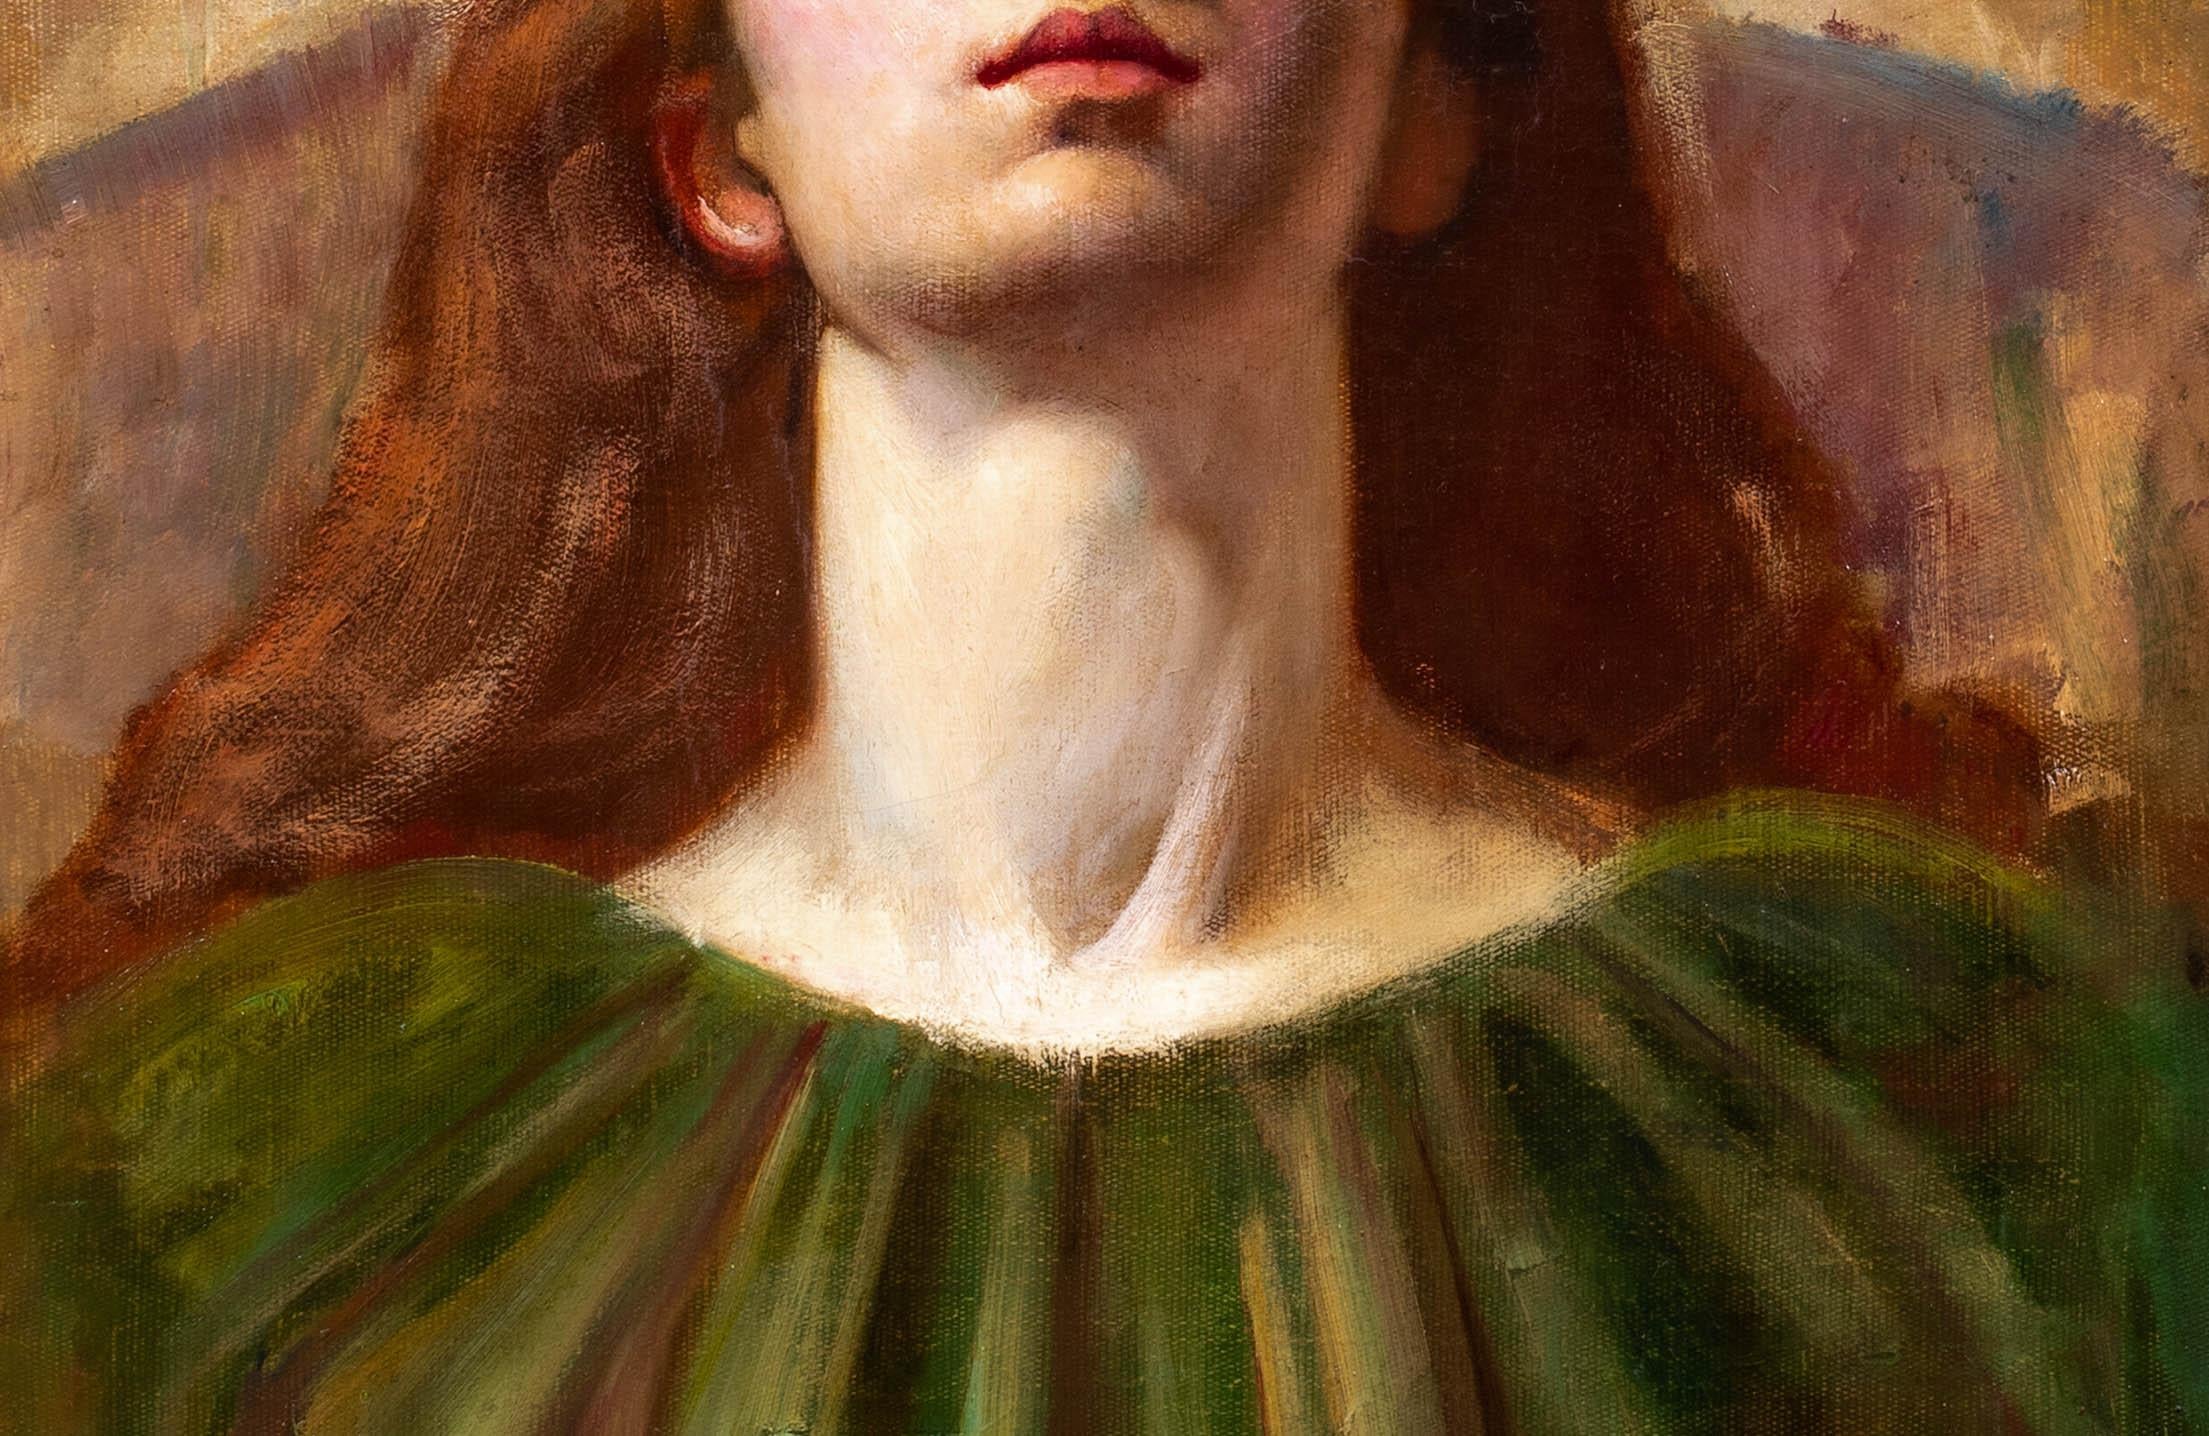 Portrait of A Red Haired Girl, 19th century

John Everett MILLAIS (1829-1896)

Large 19th Century Pre-Raphaelite portrait of a Red Haired Girl, oil on canvas attributed to John Everett Millais. Excellent quality and condition circa 1890 portrait of